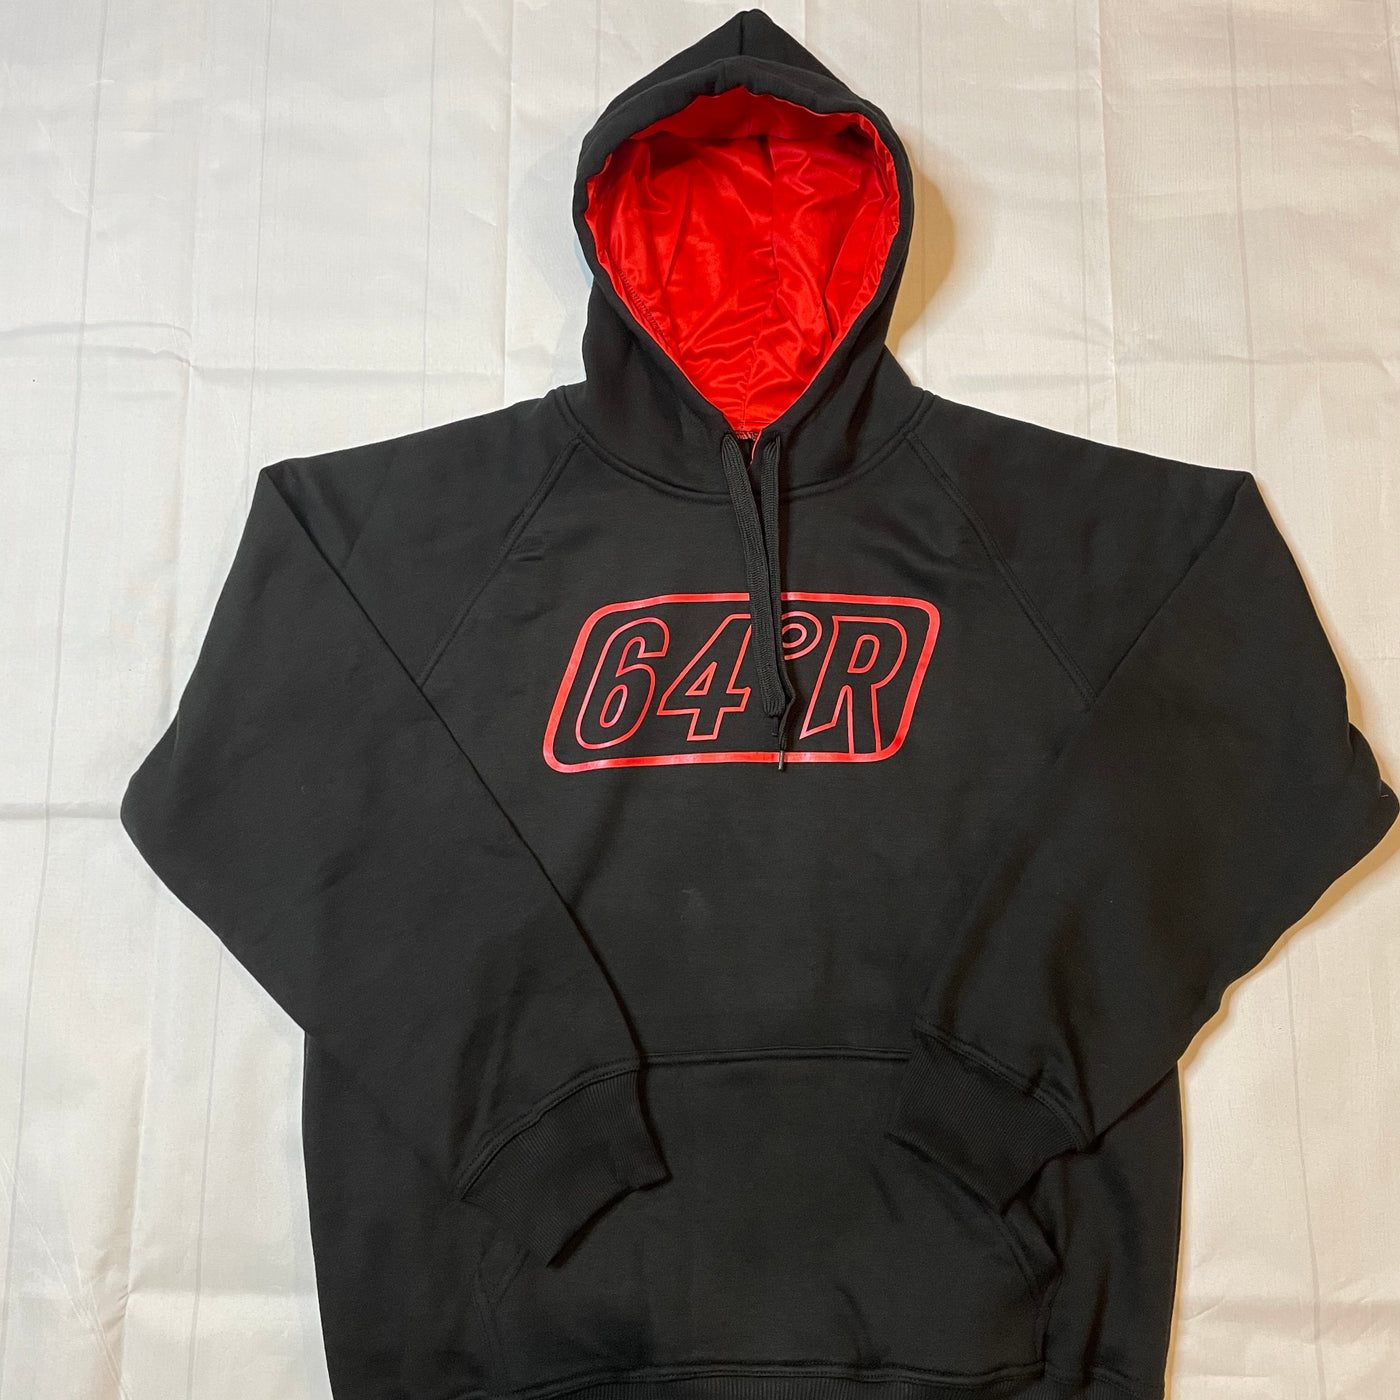 Black with red logo hoodie